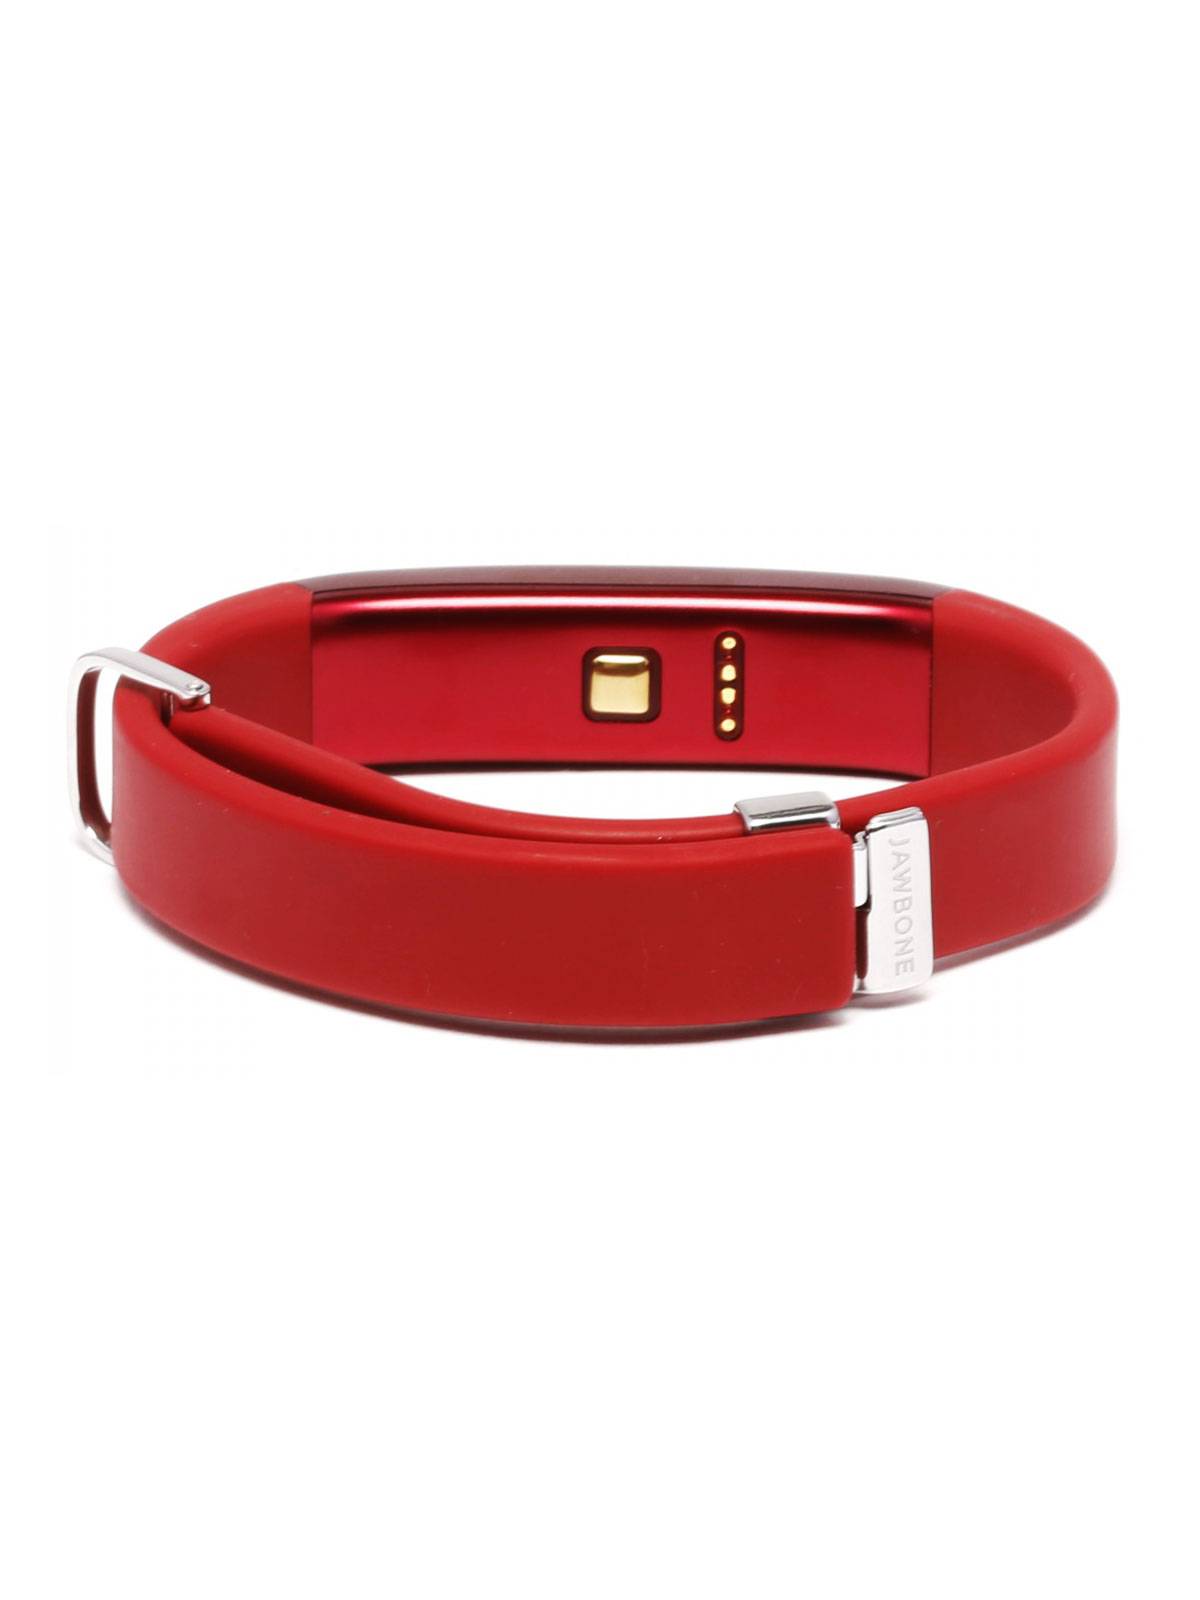 Jawbone UP3 Bluetooth Wireless Heart Rate Monitor, Sleep and Fitness Tracker - image 2 of 2